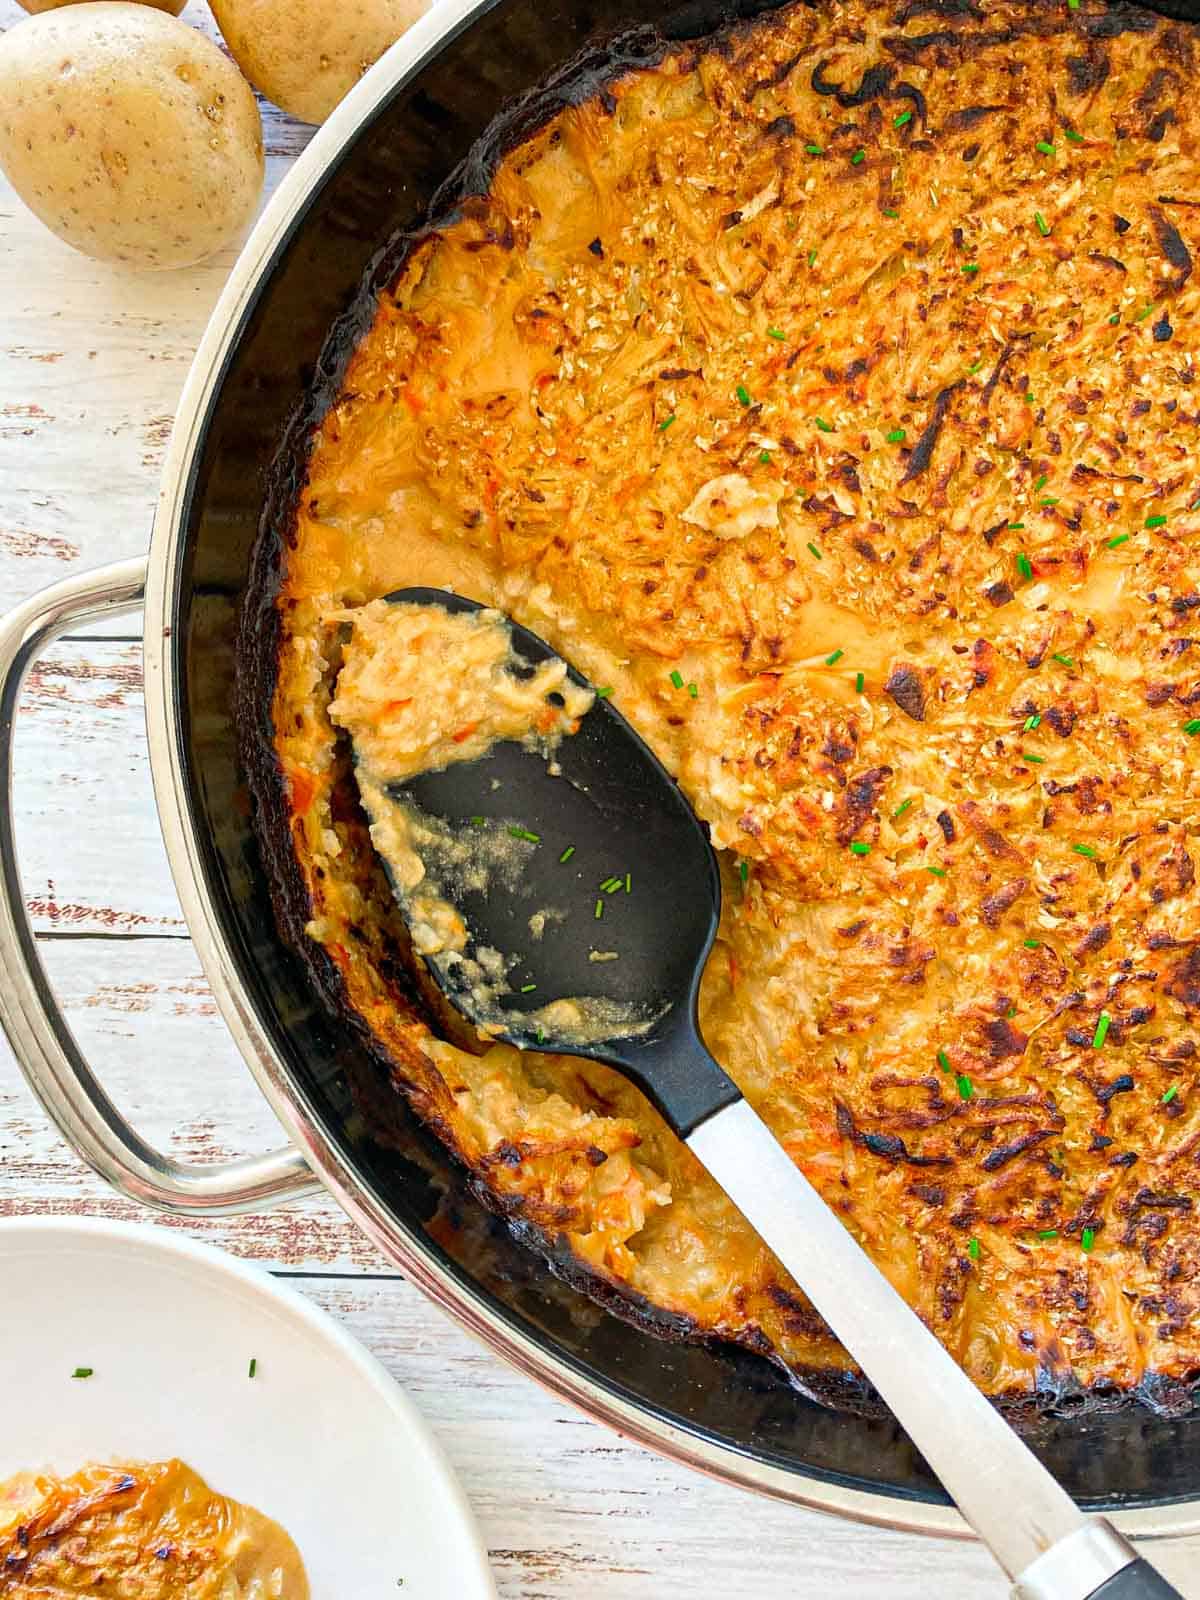 Hash brown casserole in round dish with ladle sitting inside.